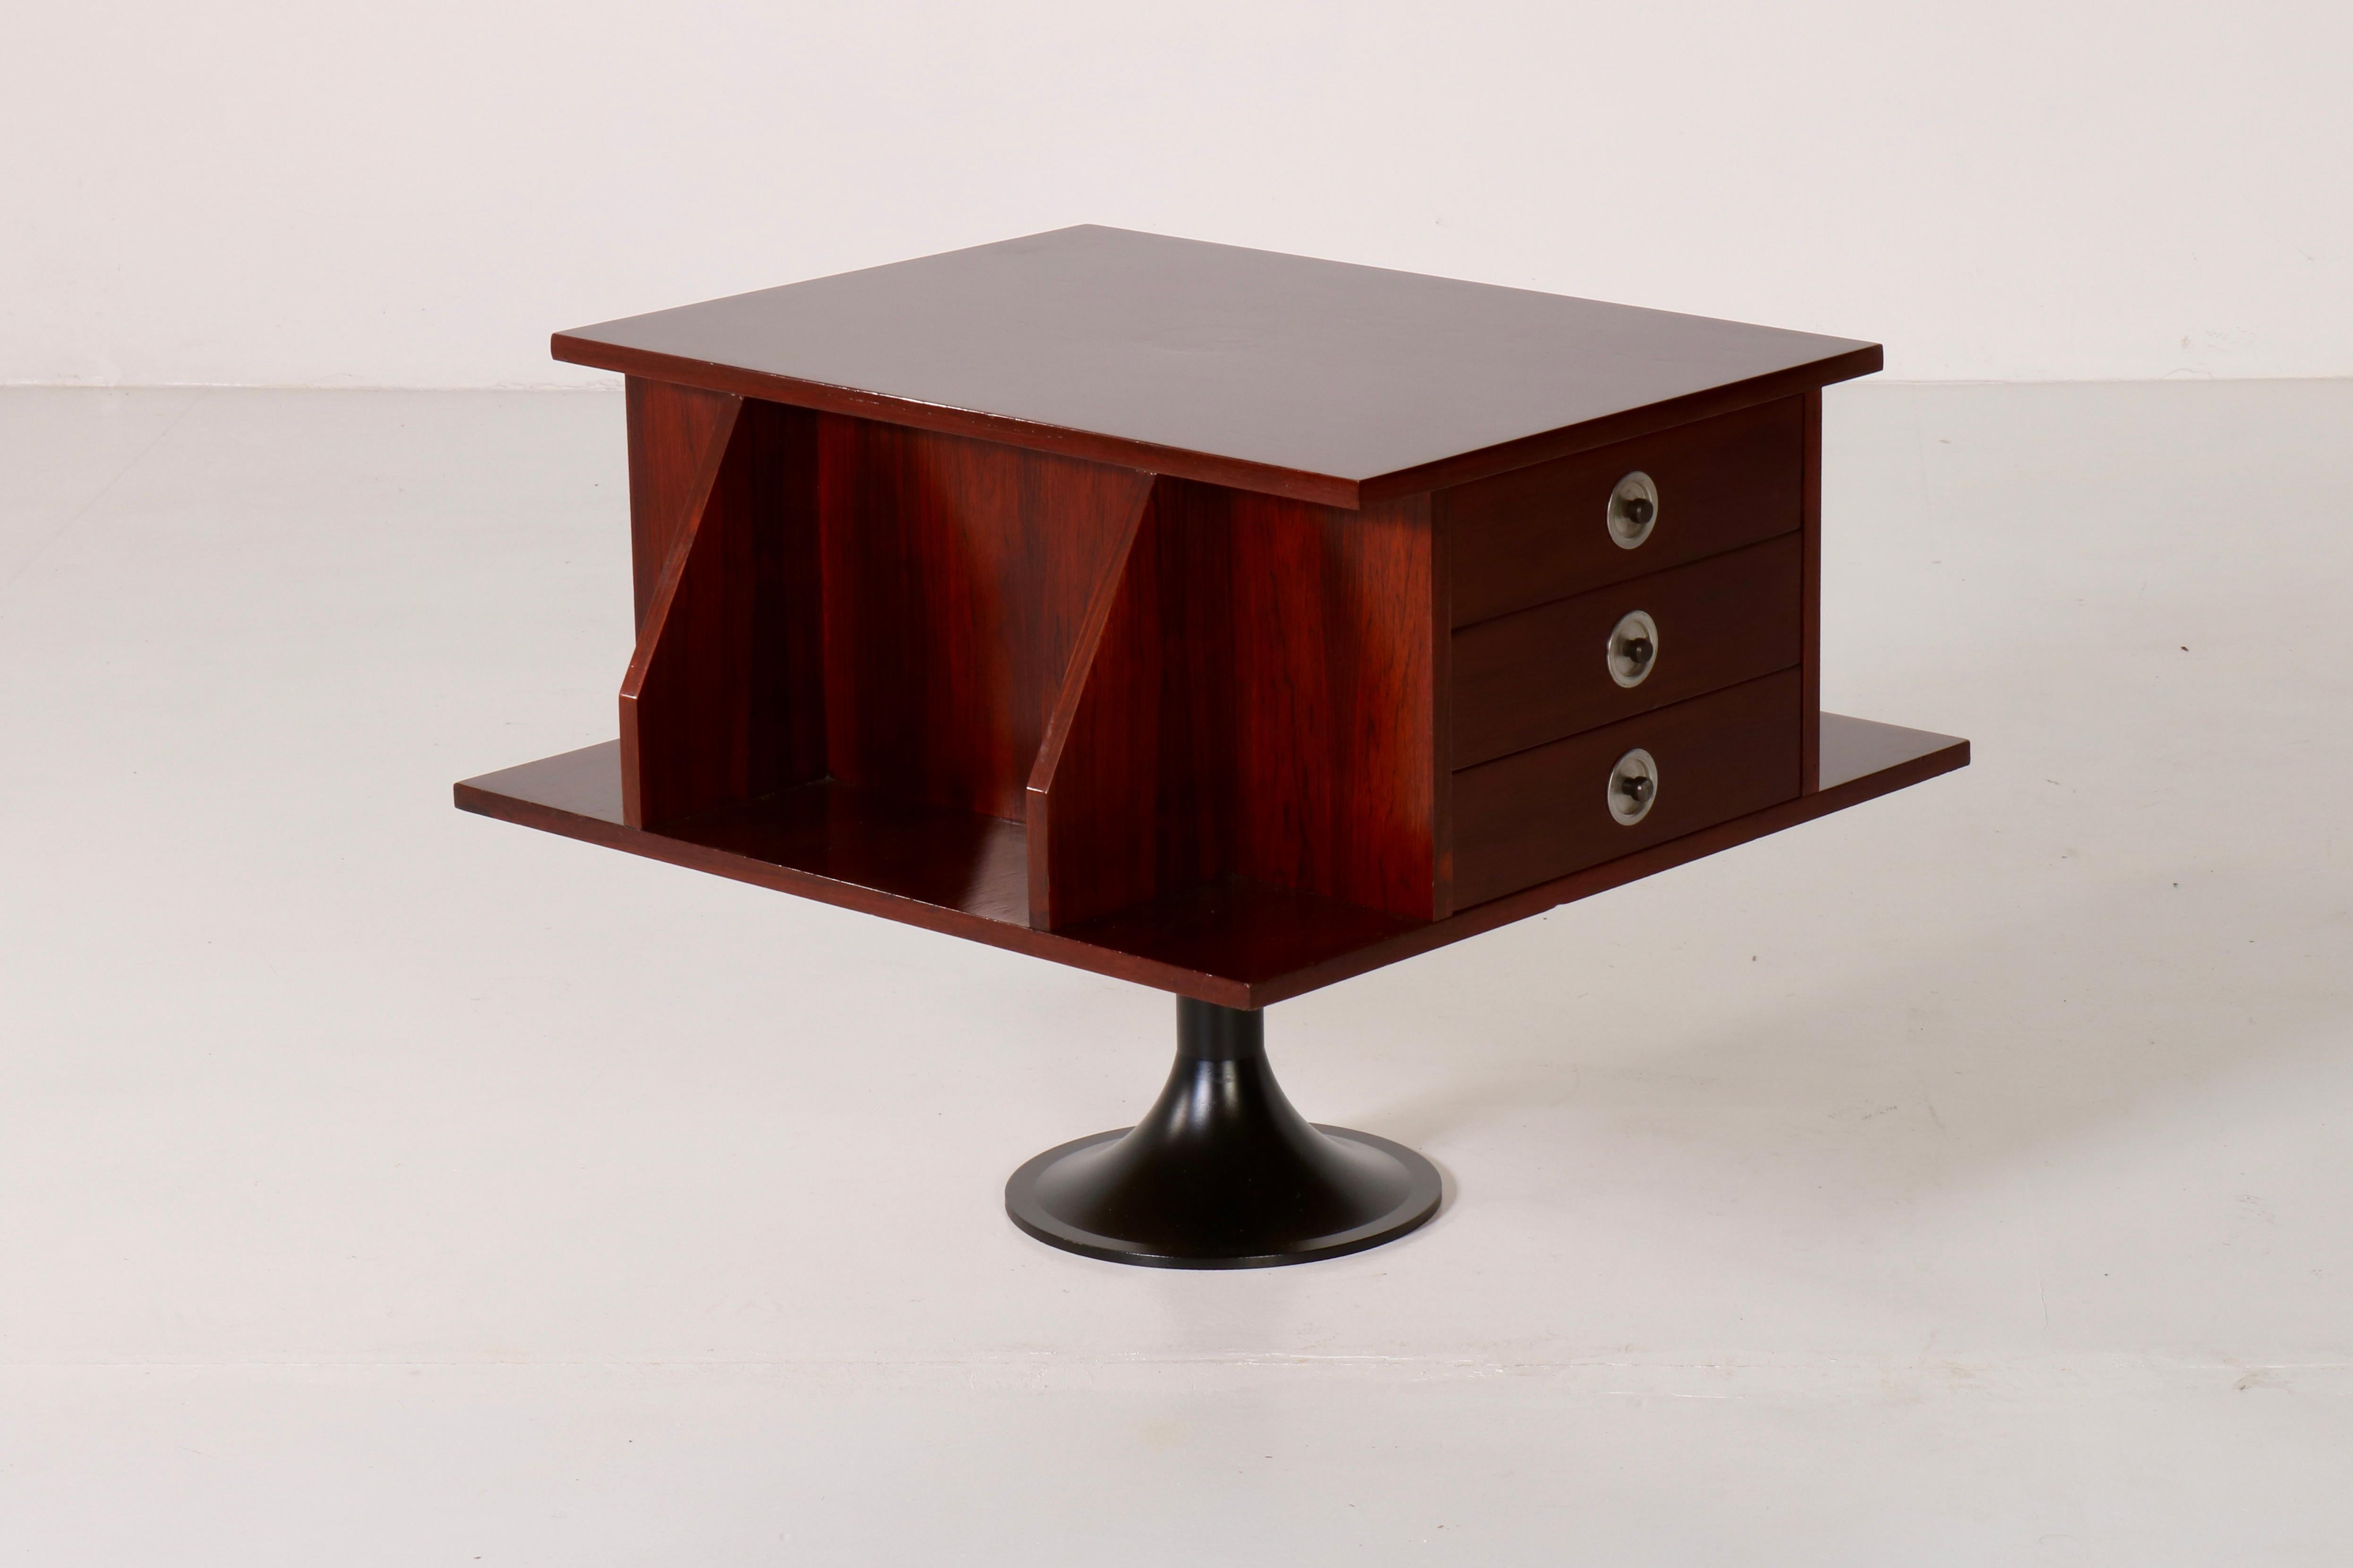 This low rotating table from 1960s Italian design encapsulates mid-century modern elegance. With its sleek lines and ingenious rotating feature, this table harmonizes form and function effortlessly becoming the perfect cocktail table or interior for